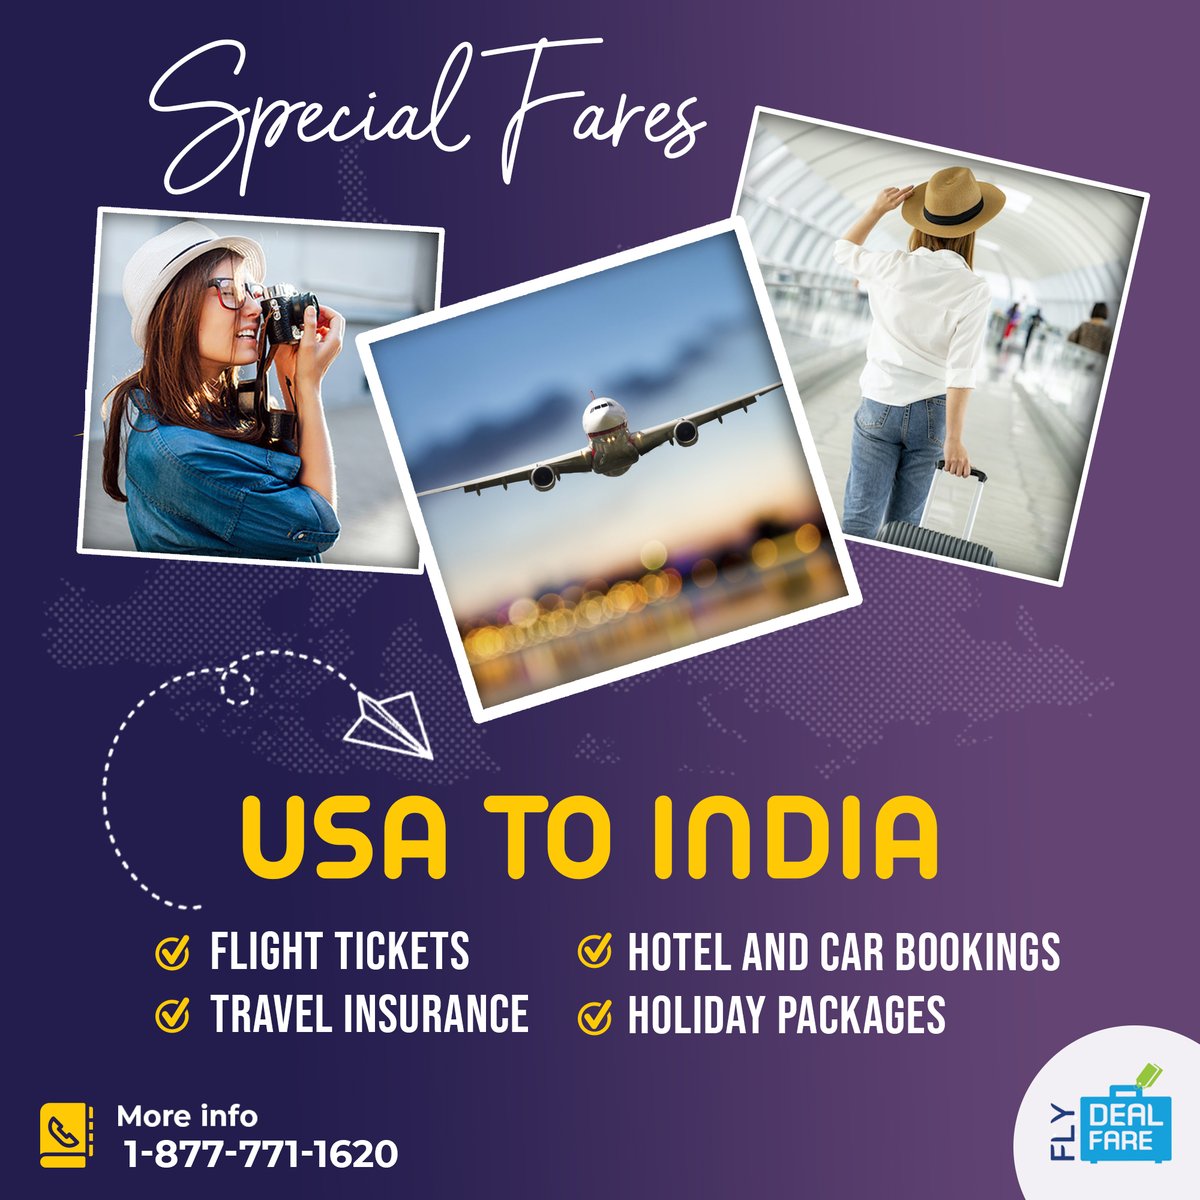 Summer Special Fares on #USA to #India Flights✈️
Book Now!!

For more information:
📲 +1-877-771-1620
🌐 flydealfare.com

#Flydealfare #USAtoIndia #FlightstoIndia #BookAirTicketOnline #SpecialFare #AirTicketing #india #travel #flights #travelinsurance #holidaypackages